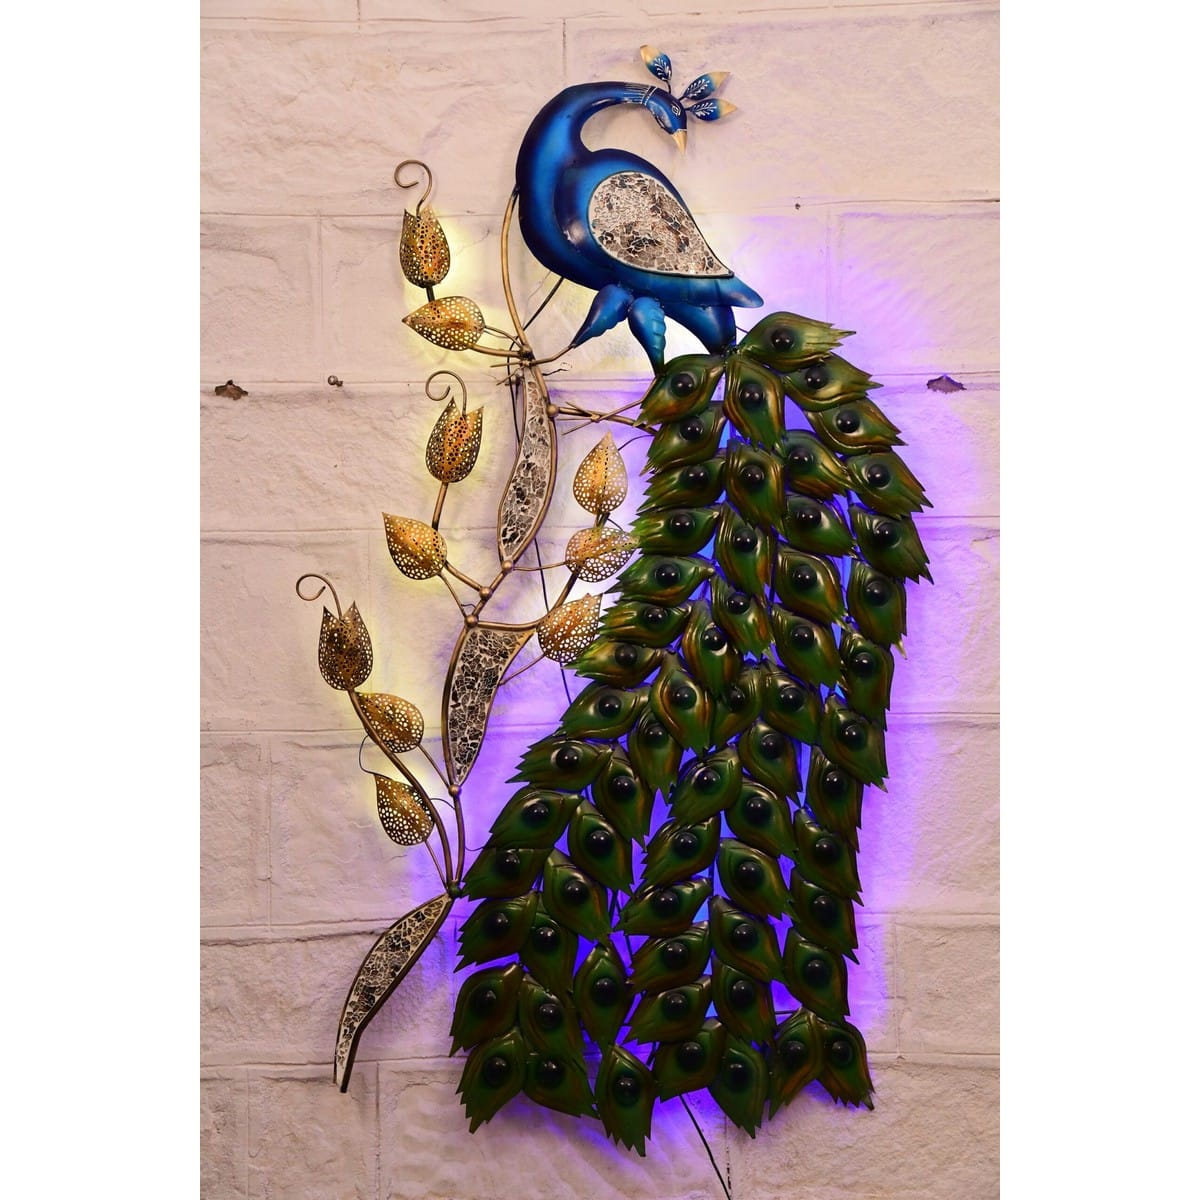 Neon Blue Light Full Peacock a Wall Decorative Product  